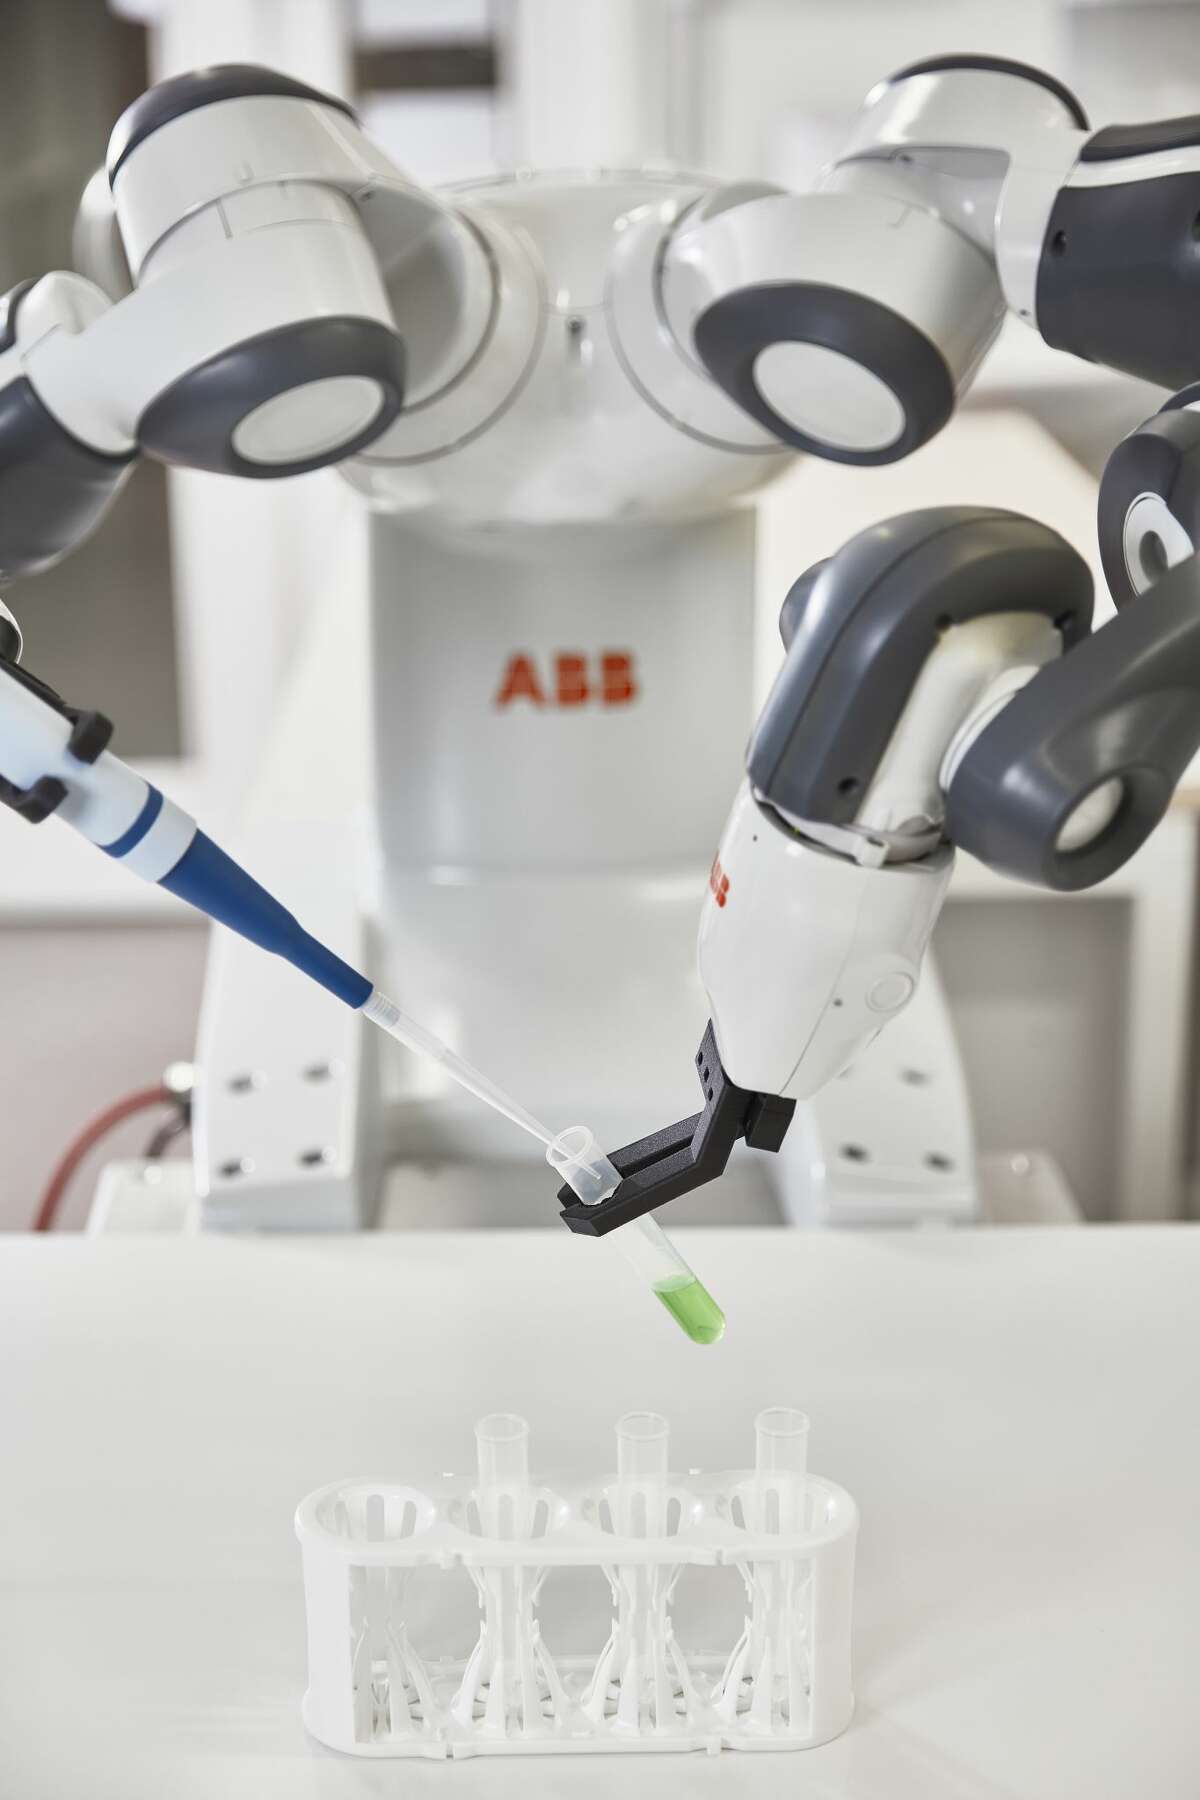 Pictured is an ABB robot. The Switzerland-based company will open a 5,300-square-foot robotics research and development facility at the Texas Medical Center Innovation Institute. Its non-surgical robots could be programmed to do repetitive, time-consuming tasks, such as measuring medications in the proper dosage and assembling sterile instrument kits used by surgeons. 